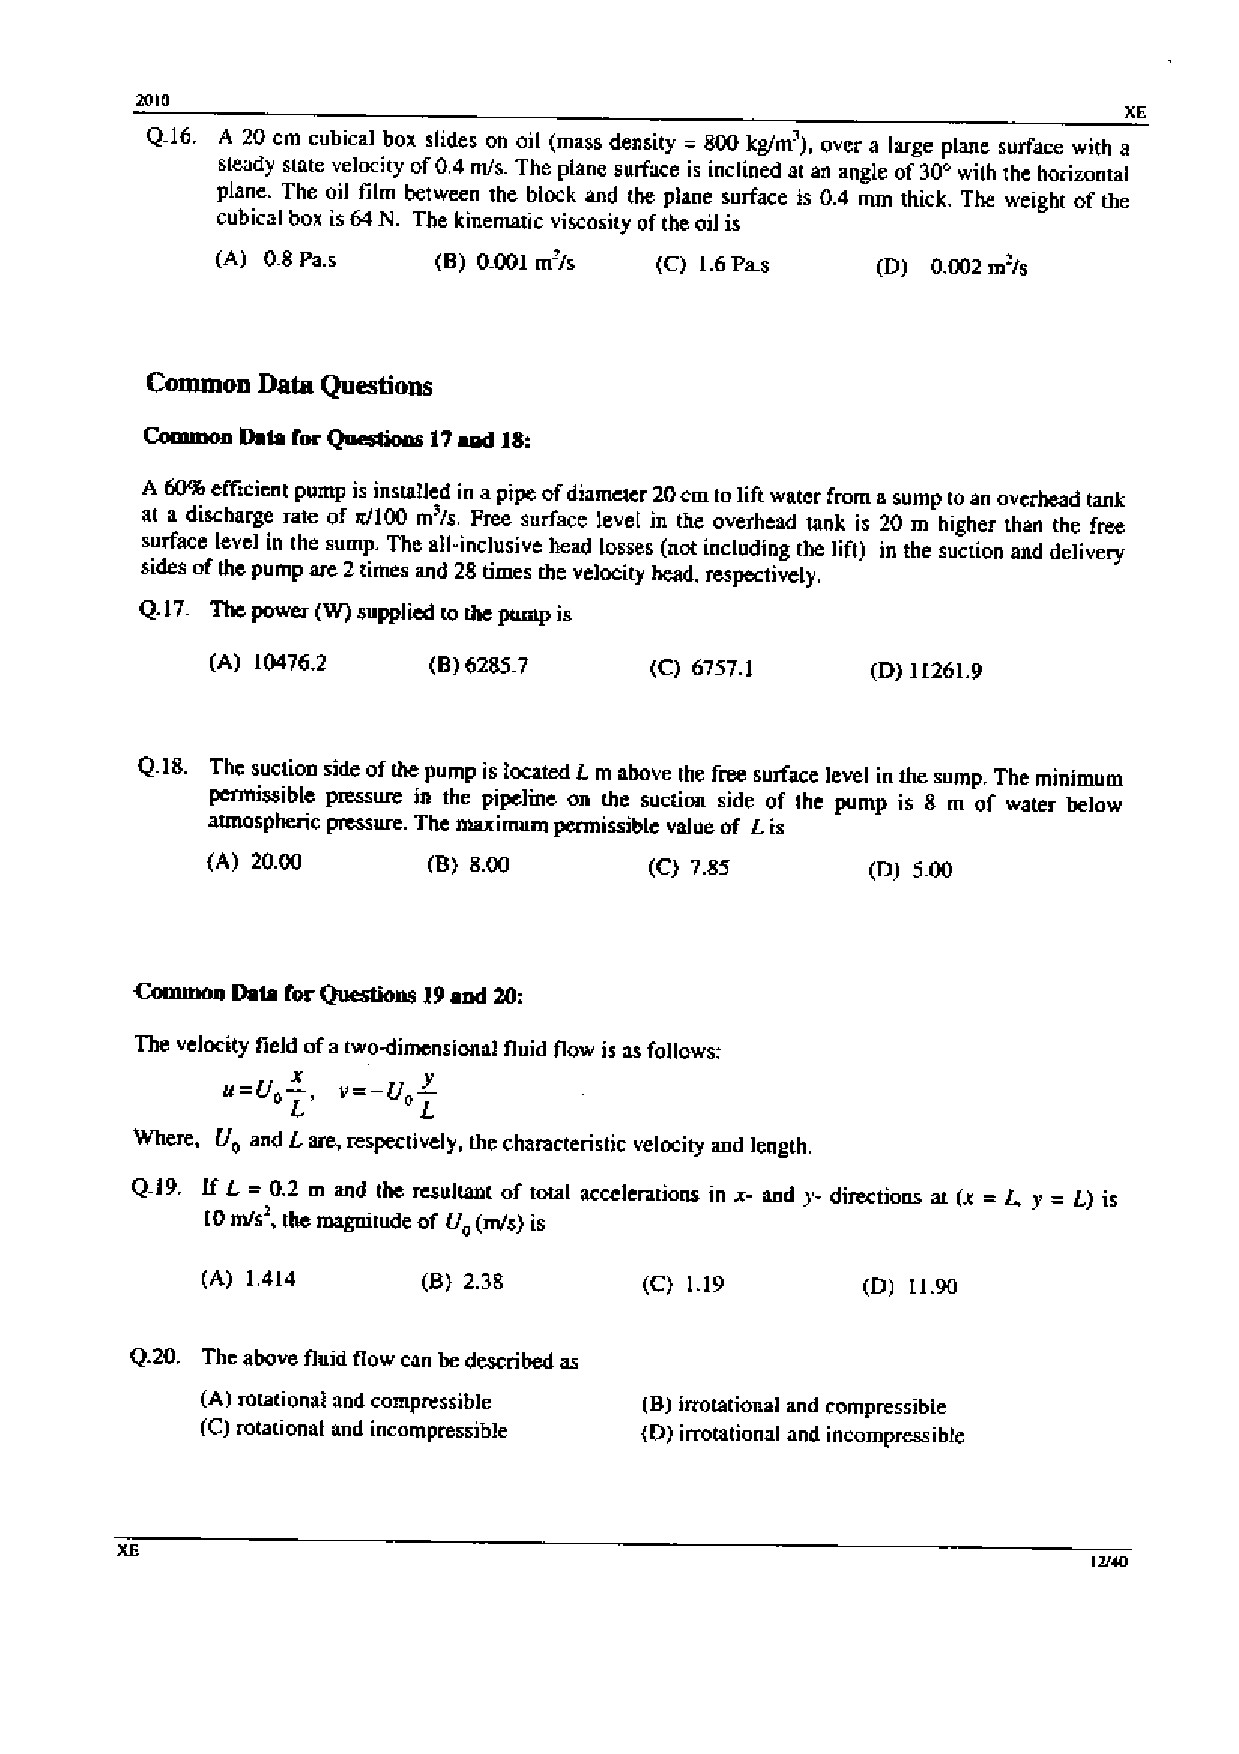 GATE Exam Question Paper 2010 Engineering Sciences 12